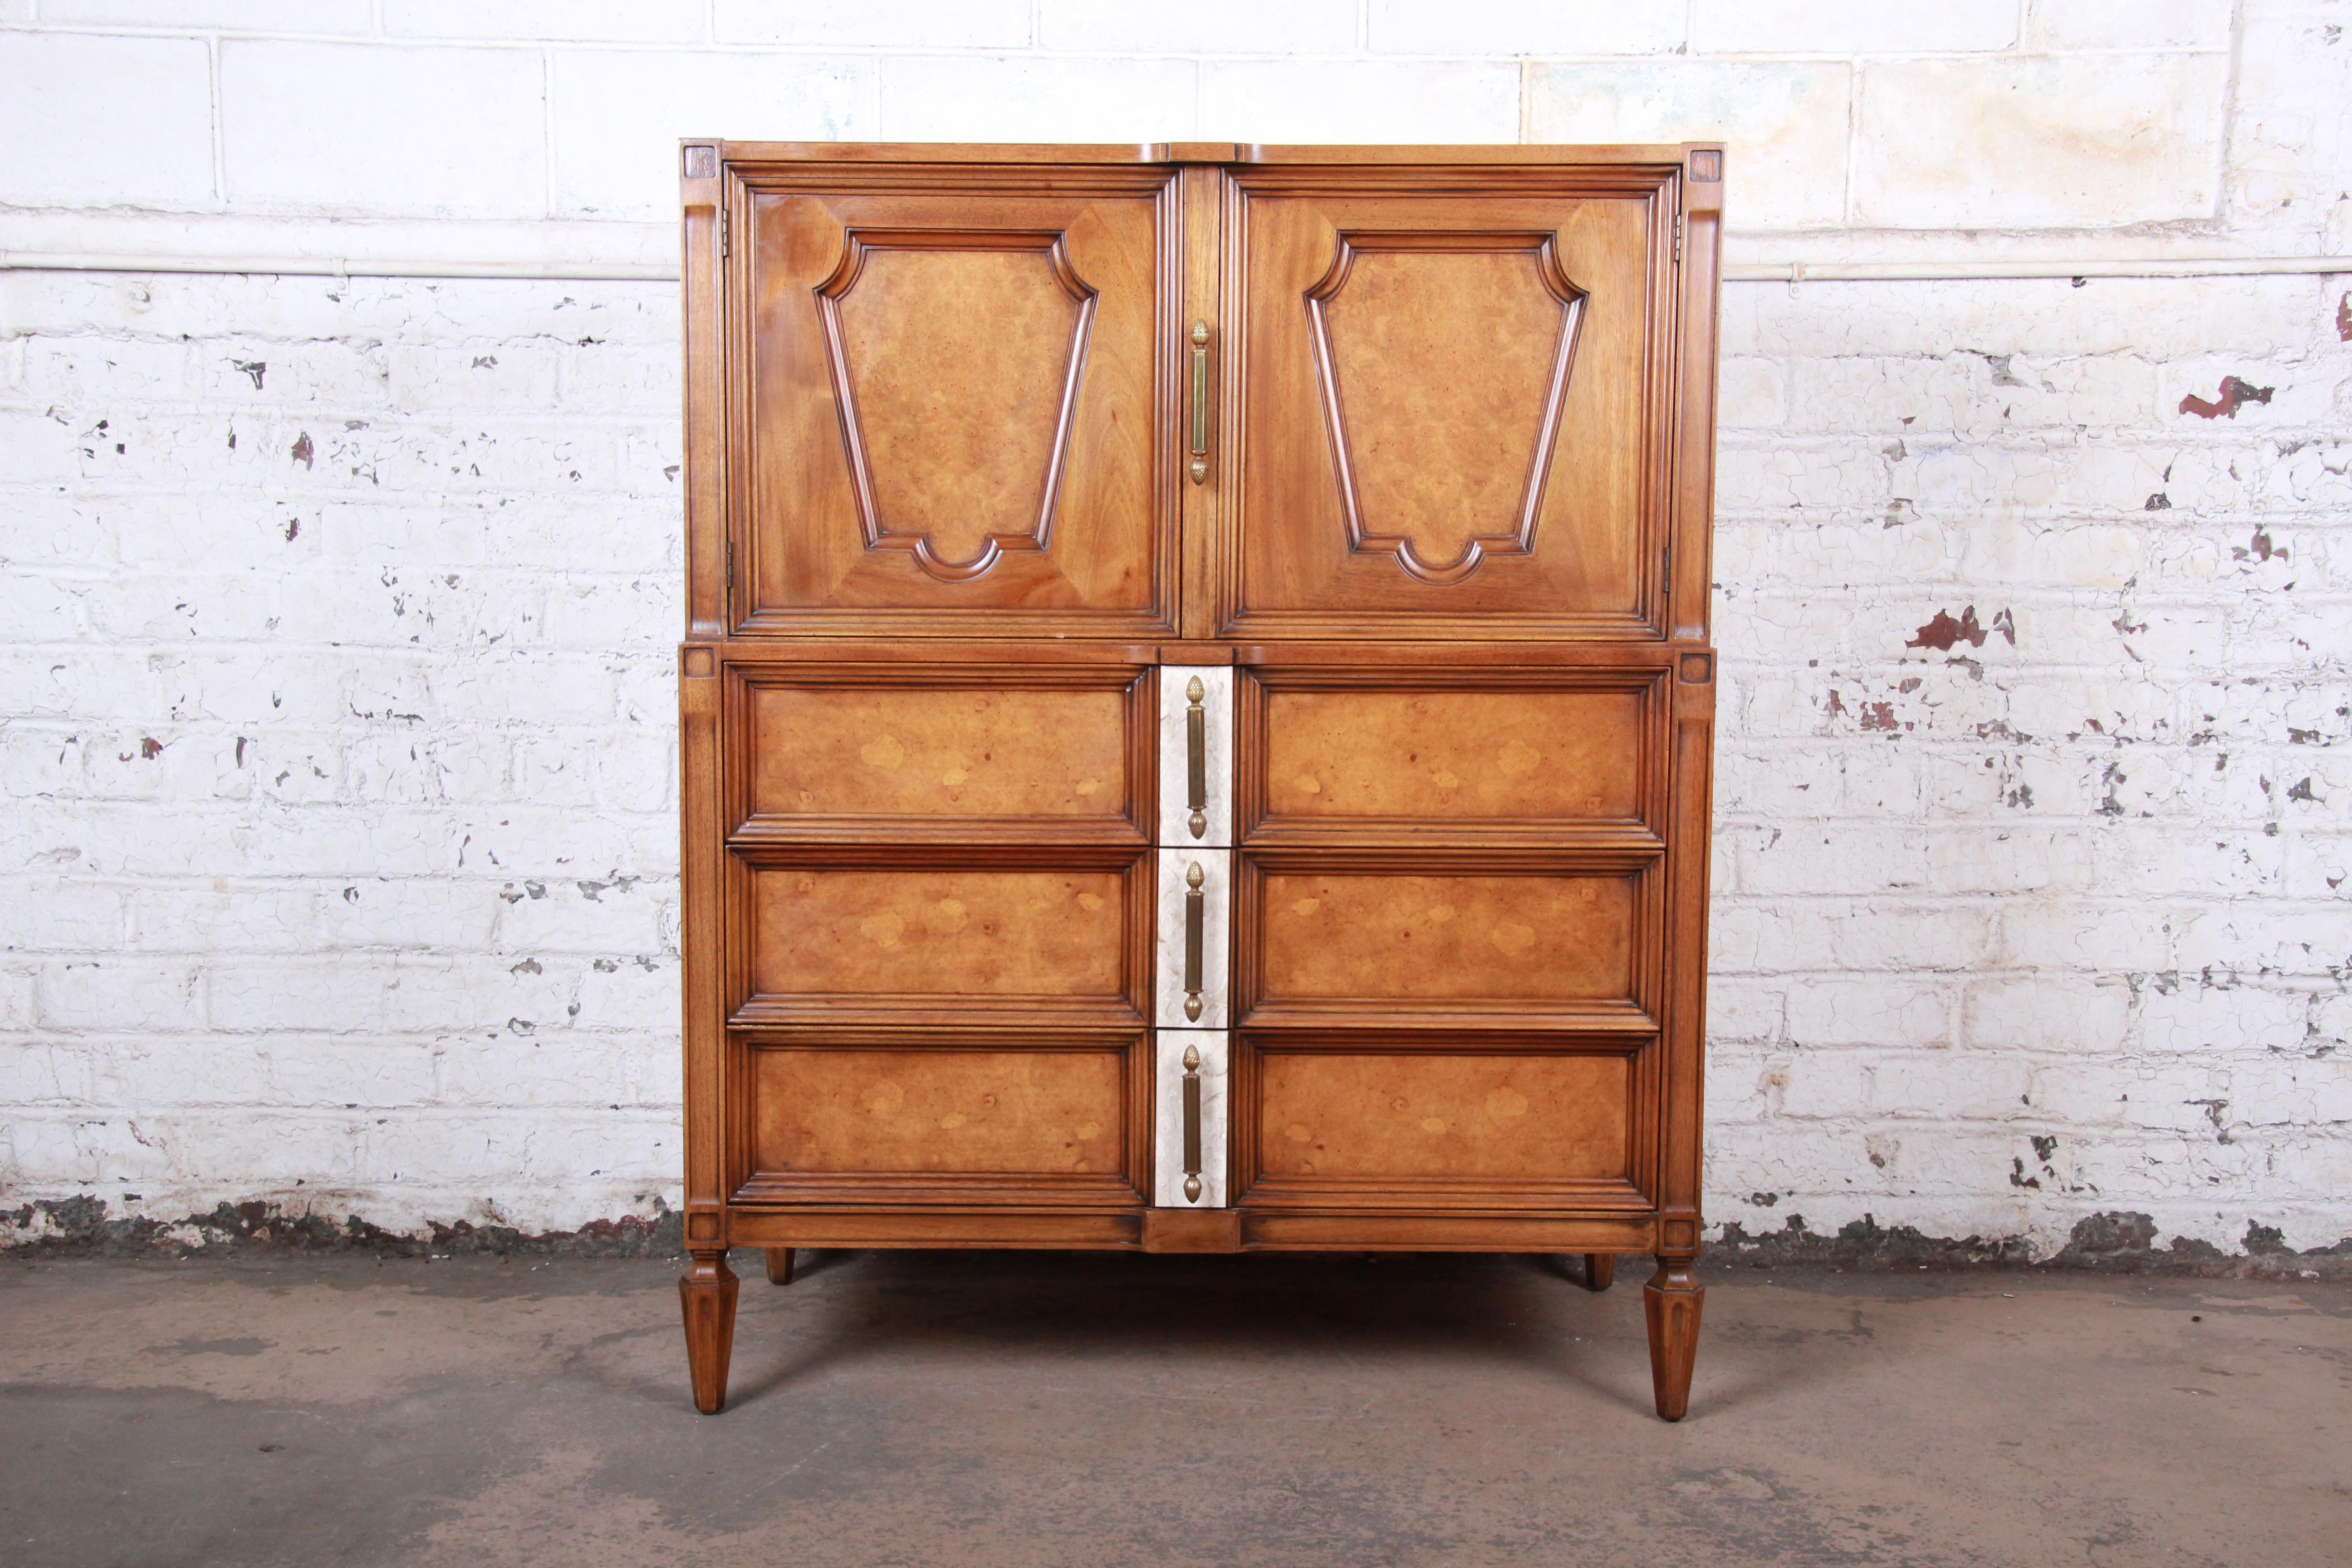 A gorgeous Mid-Century Modern Hollywood Regency gentleman's chest from the 